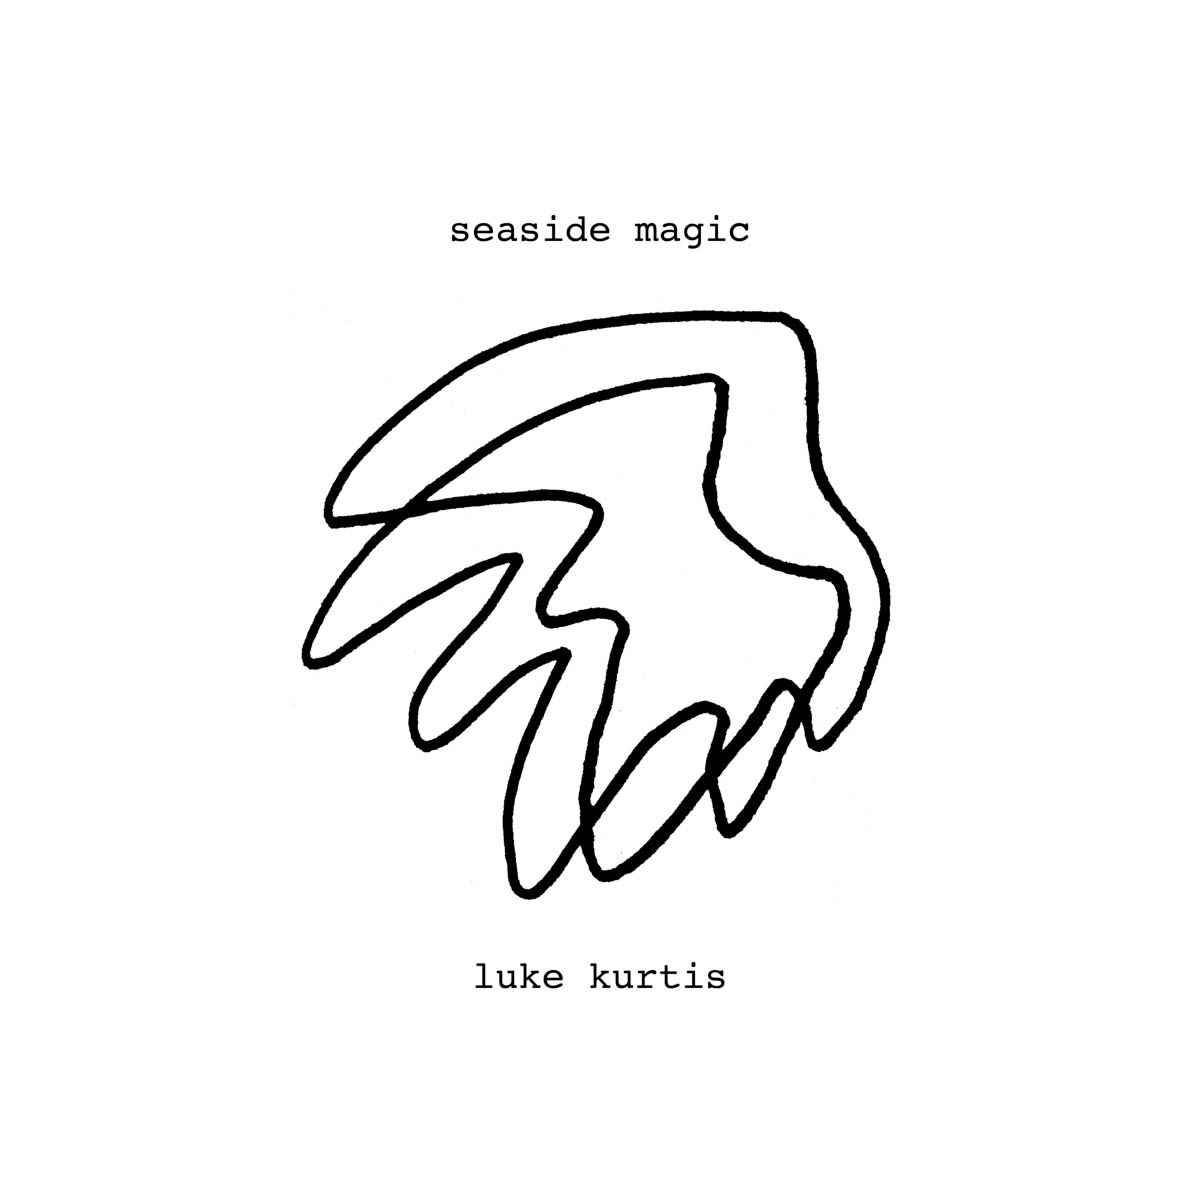 cover of "seaside magic" single featuring an abstract drawing that evokes sea shells